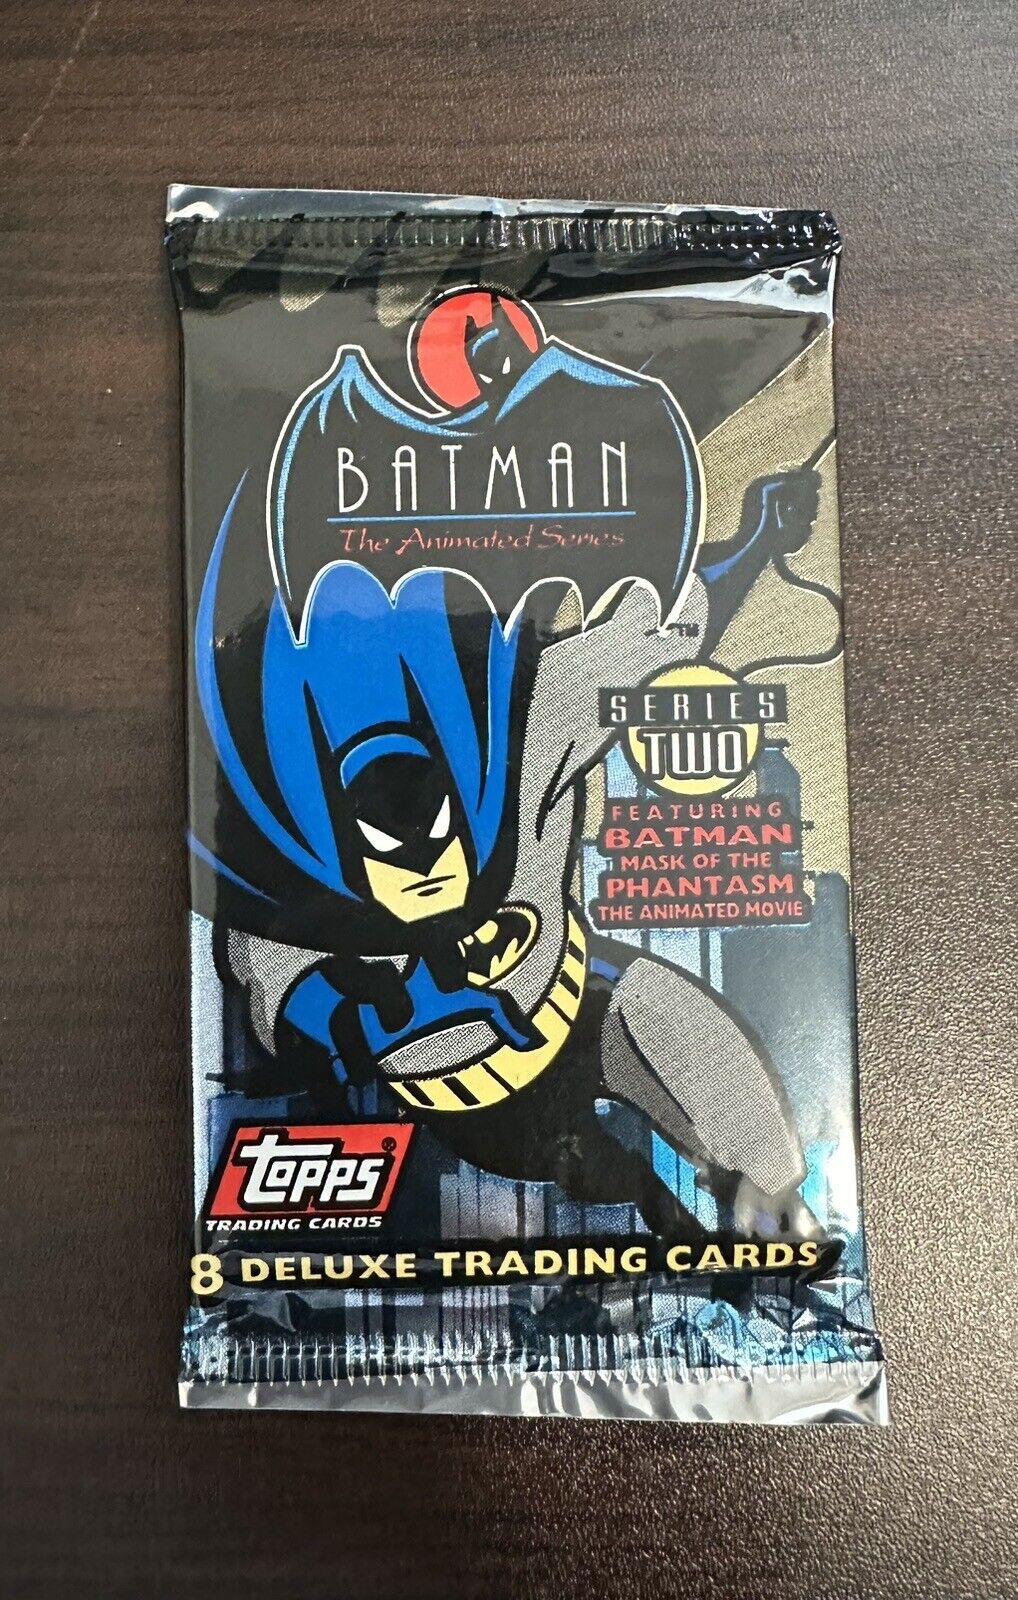 1993 Topps Batman Series Two Trading Card pack